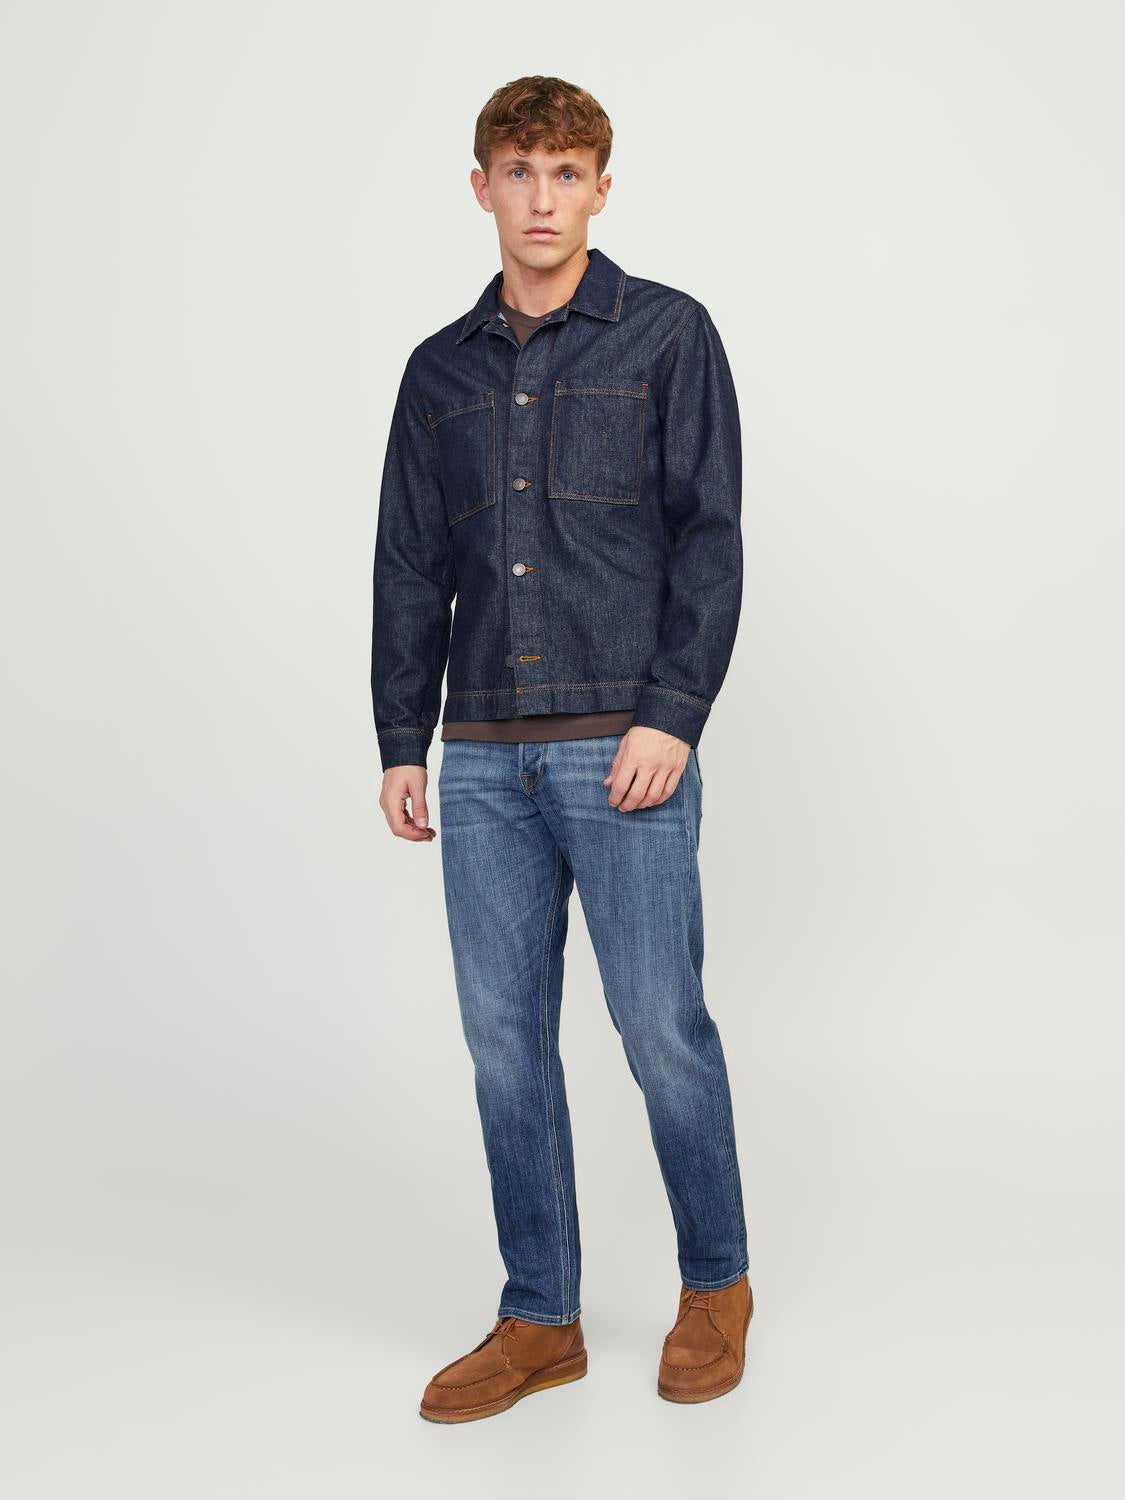 JJICHRIS JJWOOD GE 415 Relaxed Fit Jeans